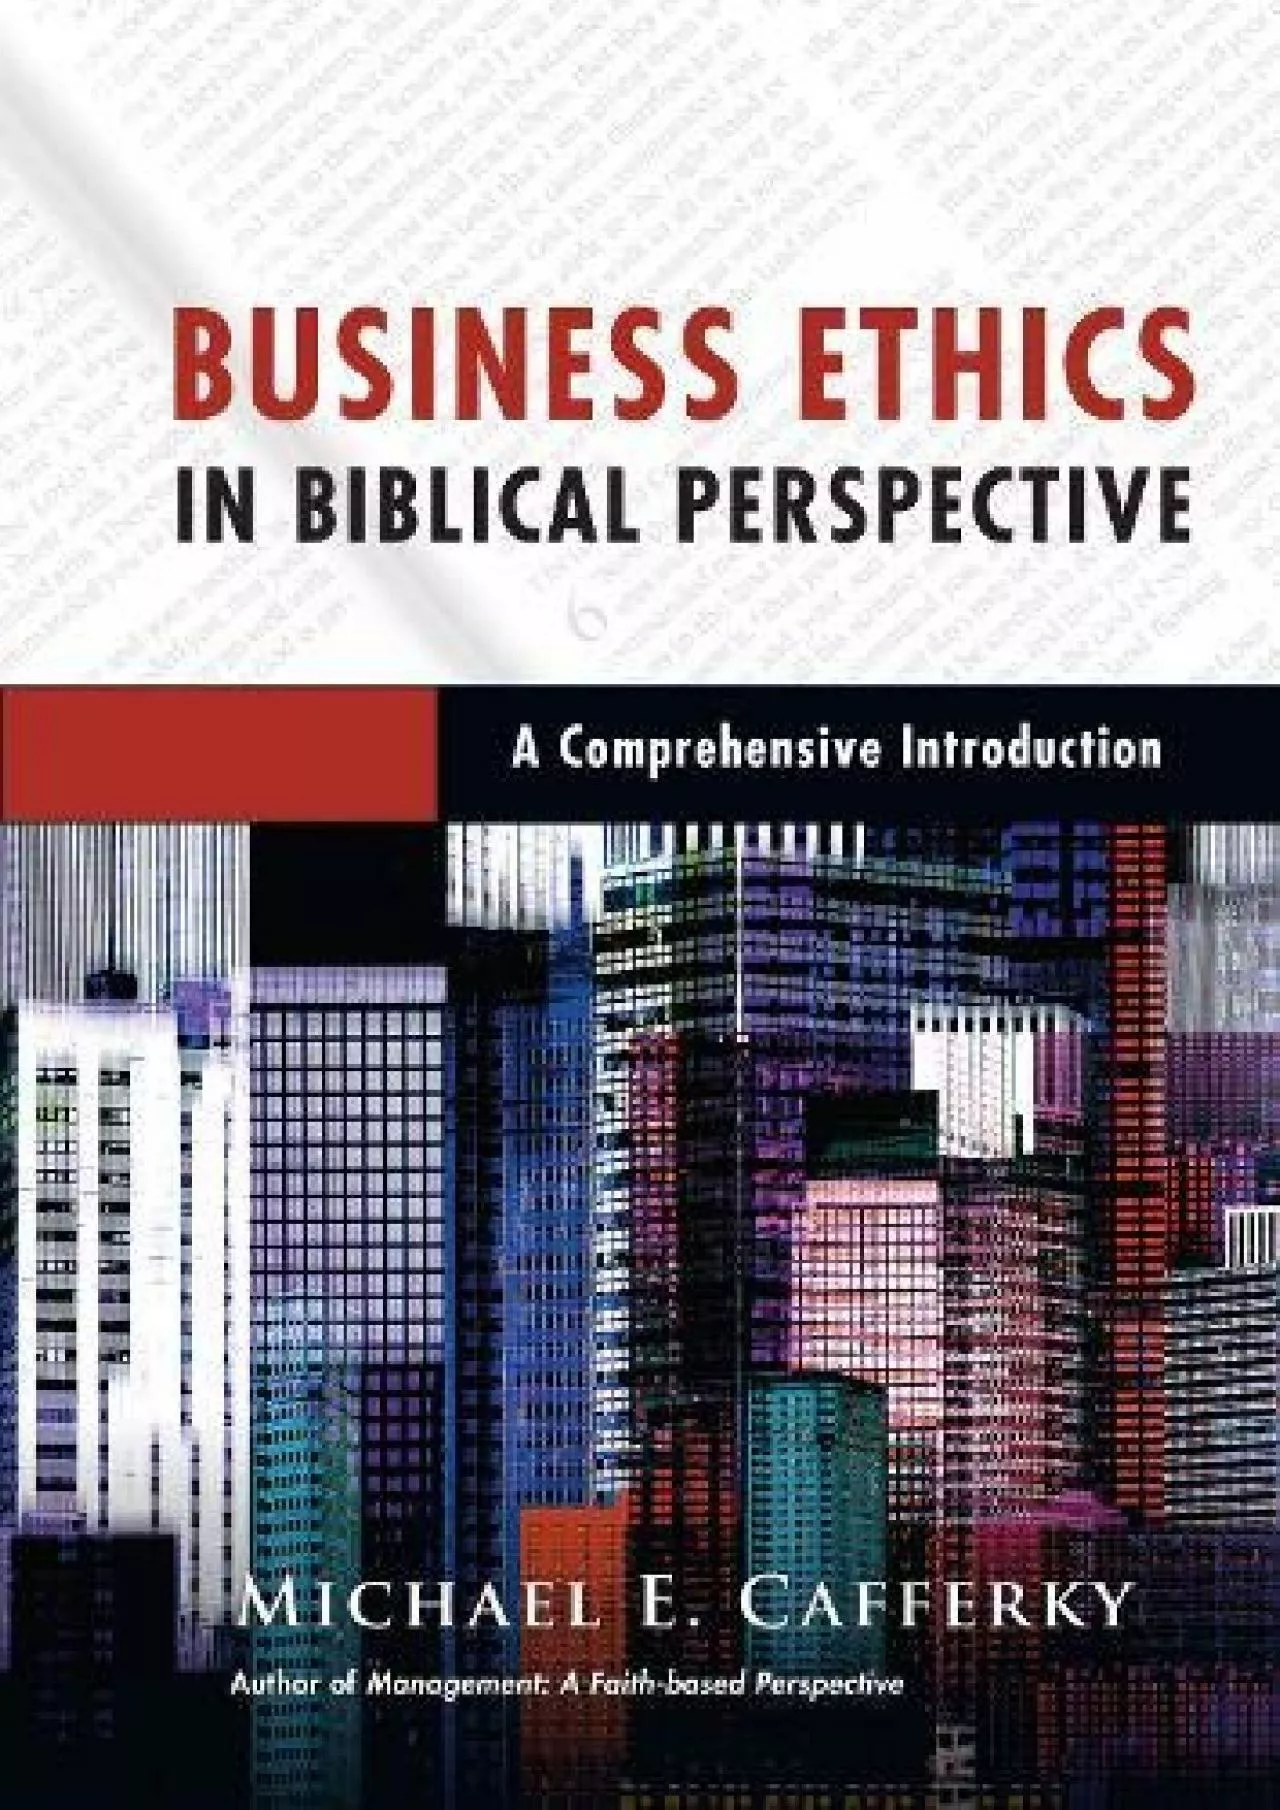 (EBOOK)-Business Ethics in Biblical Perspective: A Comprehensive Introduction